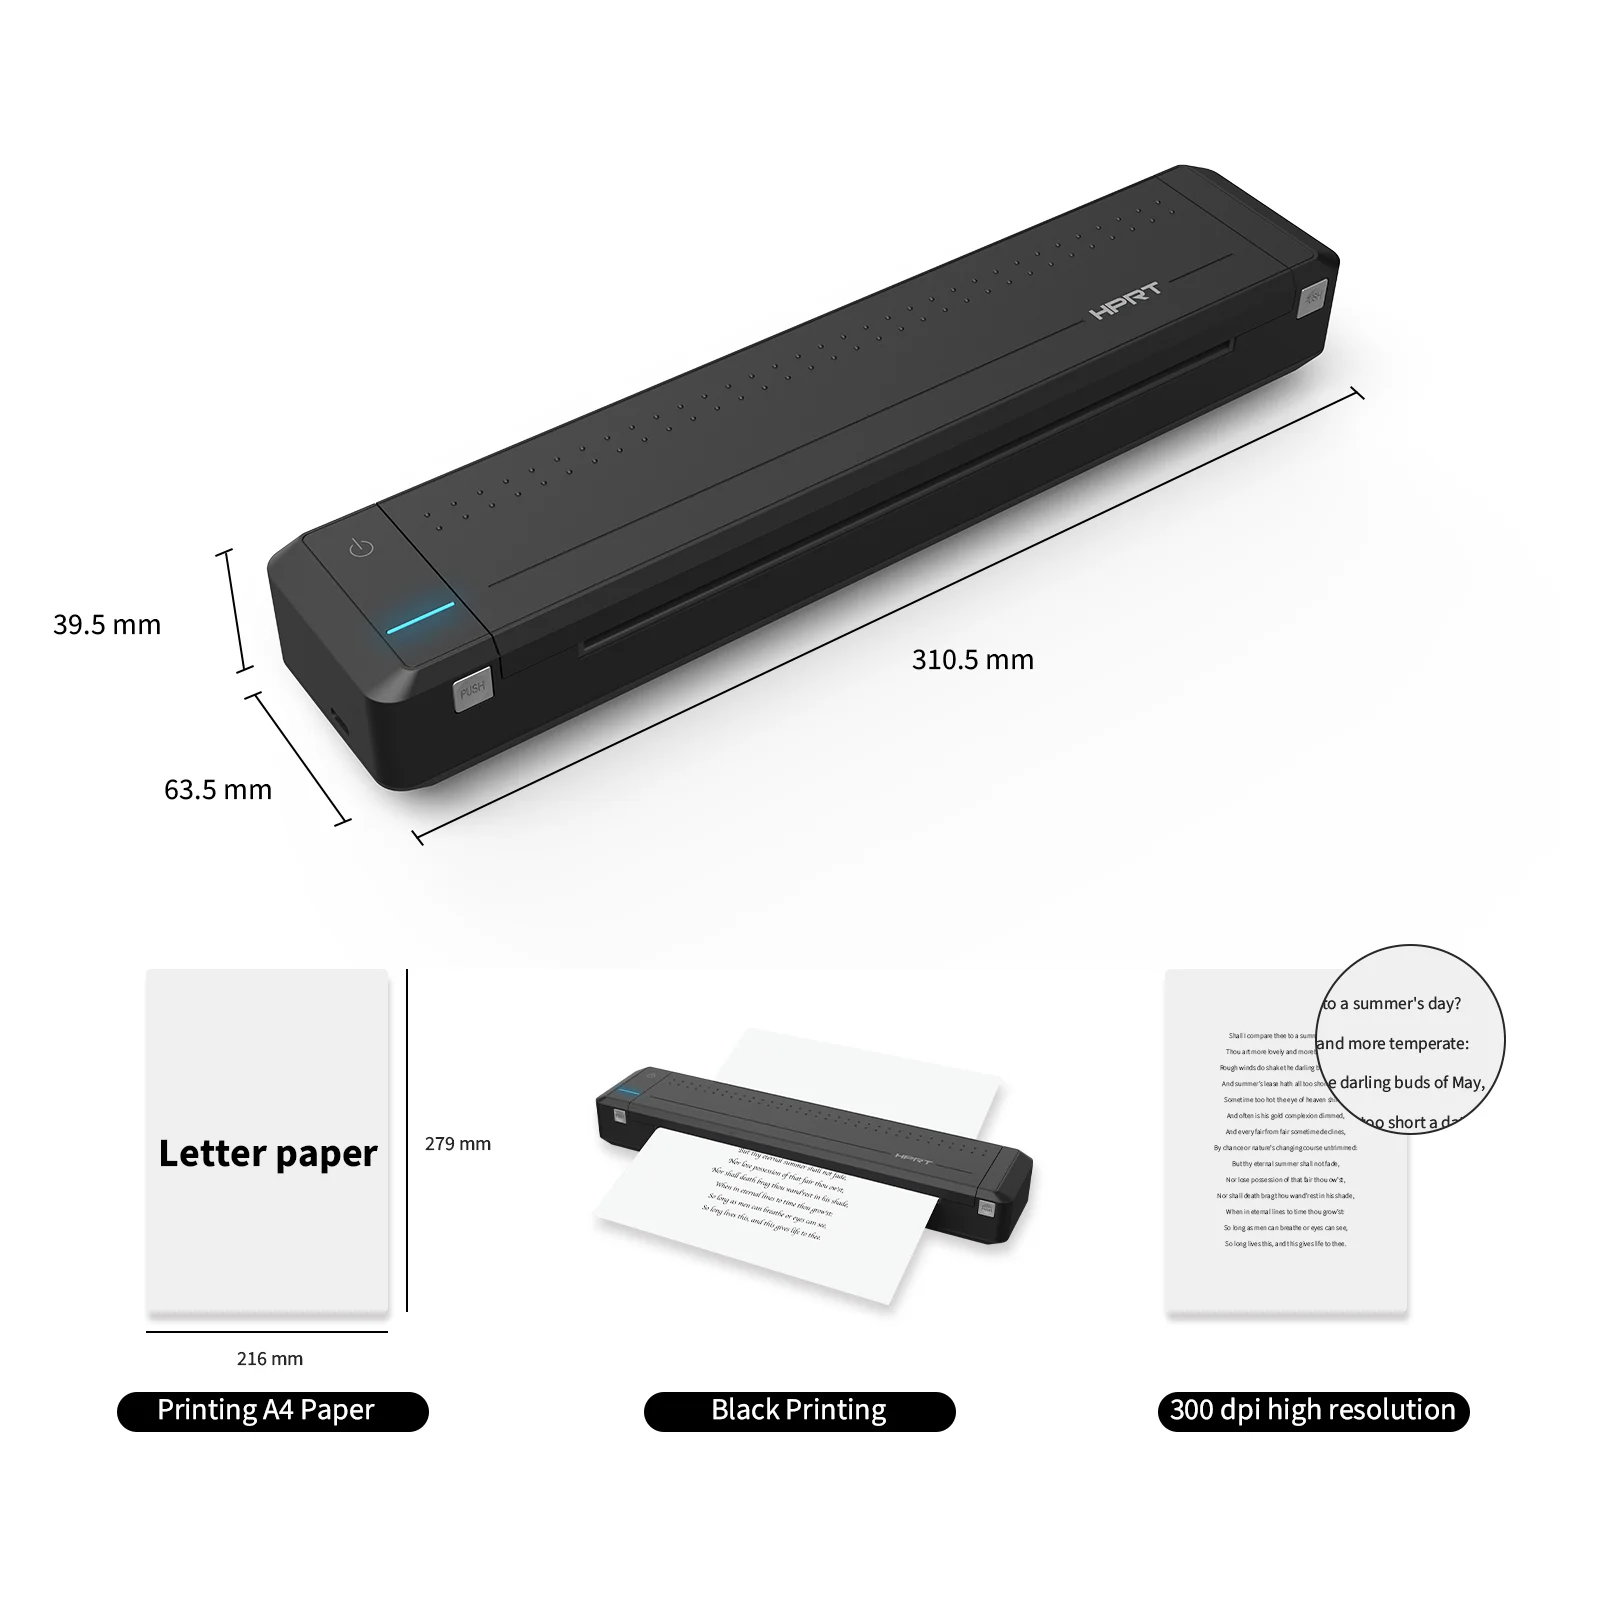 HPRT MT800 Black Words Portable Mini A4 Paper Printer with Bluetooth USB Connection Mobile Phone Computer App Office Meeting best mini printer for iphone